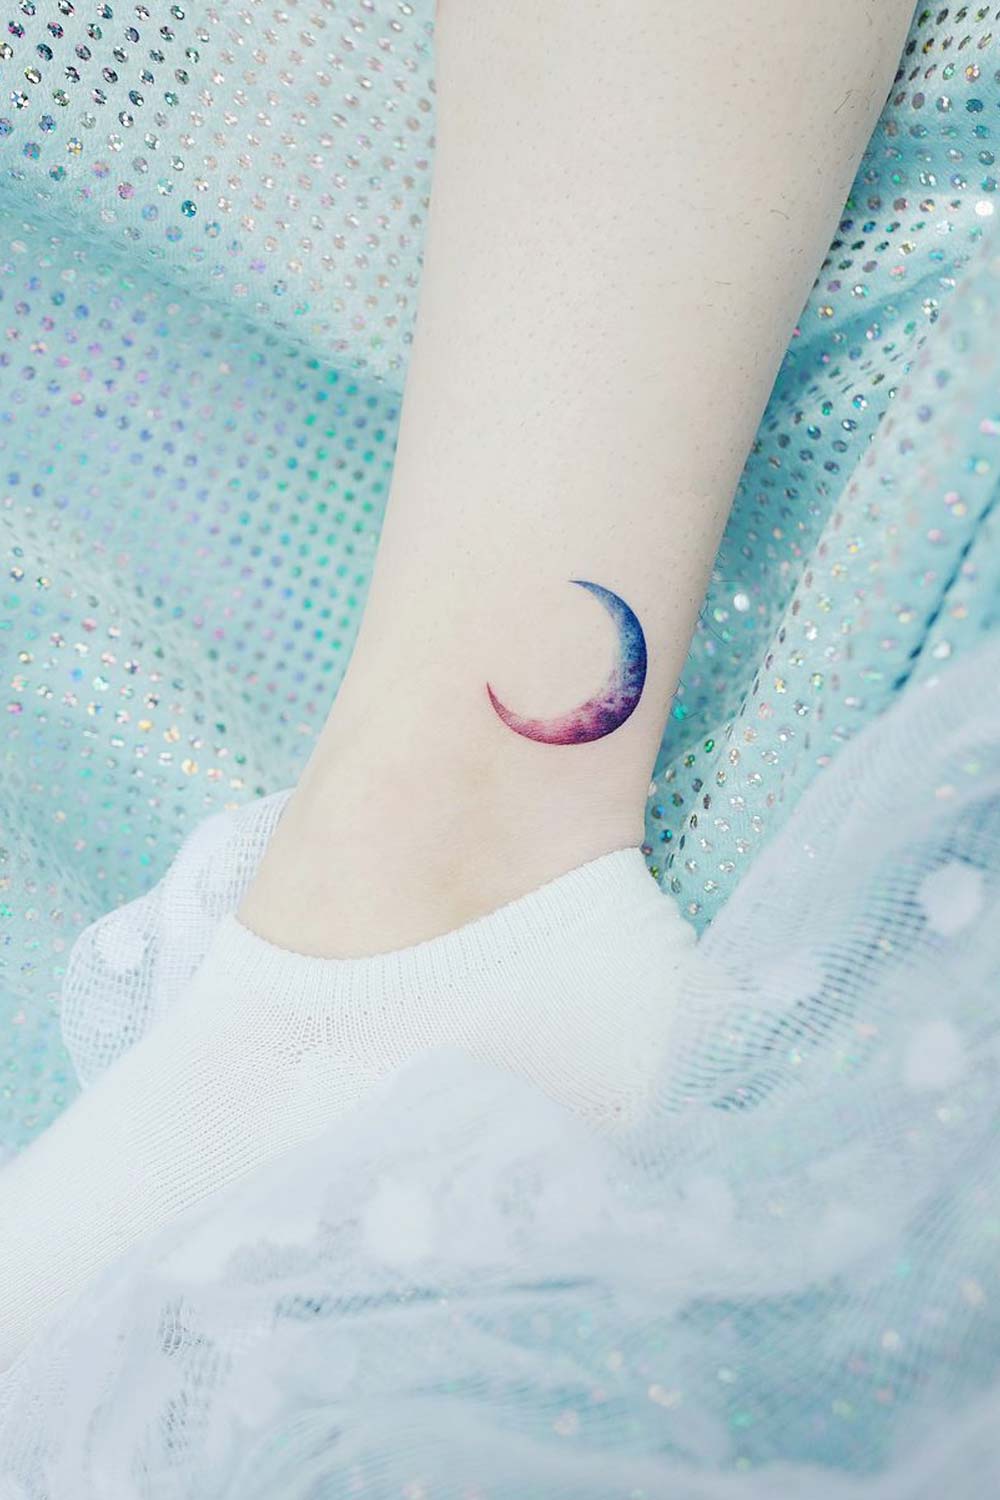 Small Ankle Moon Tattoo